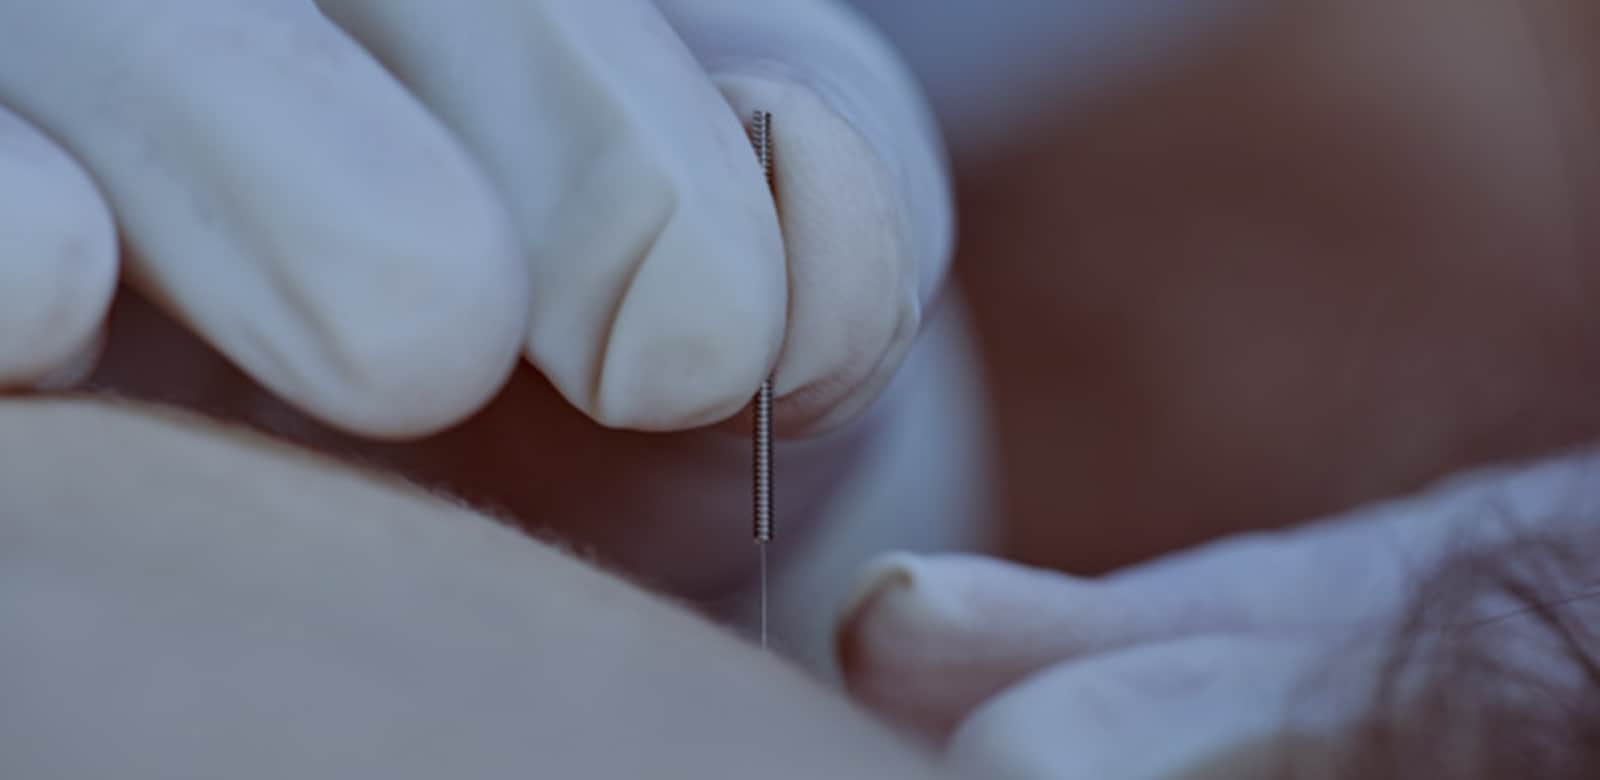 Dry Needle Therapy